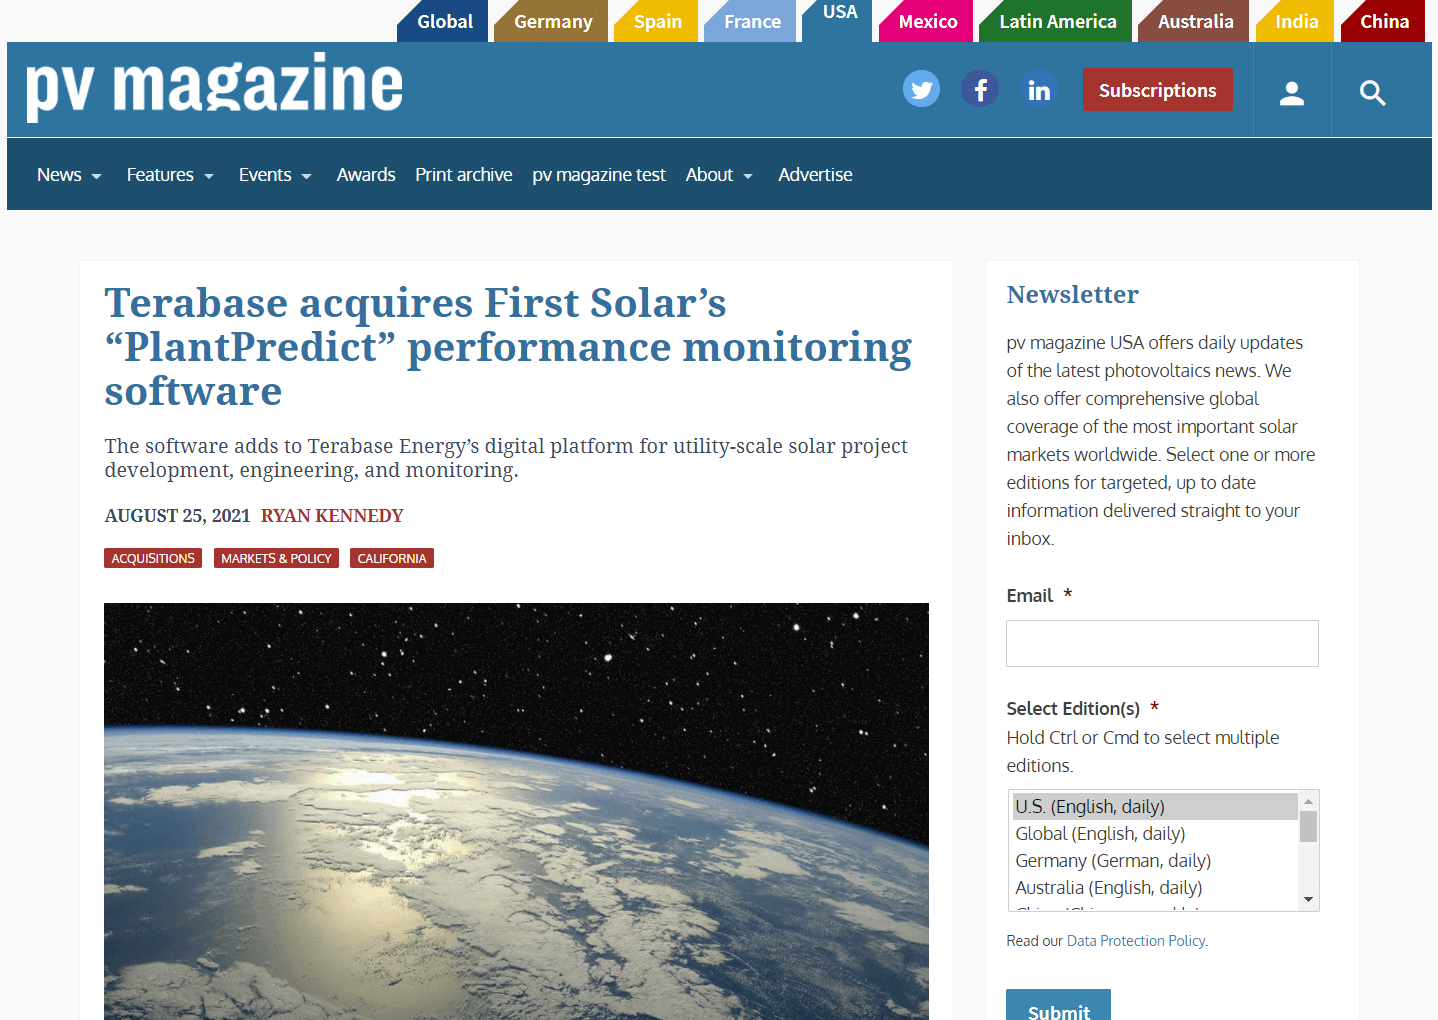 PV Magazine: Terabase acquires First Solar’s “PlantPredict” performance monitoring software